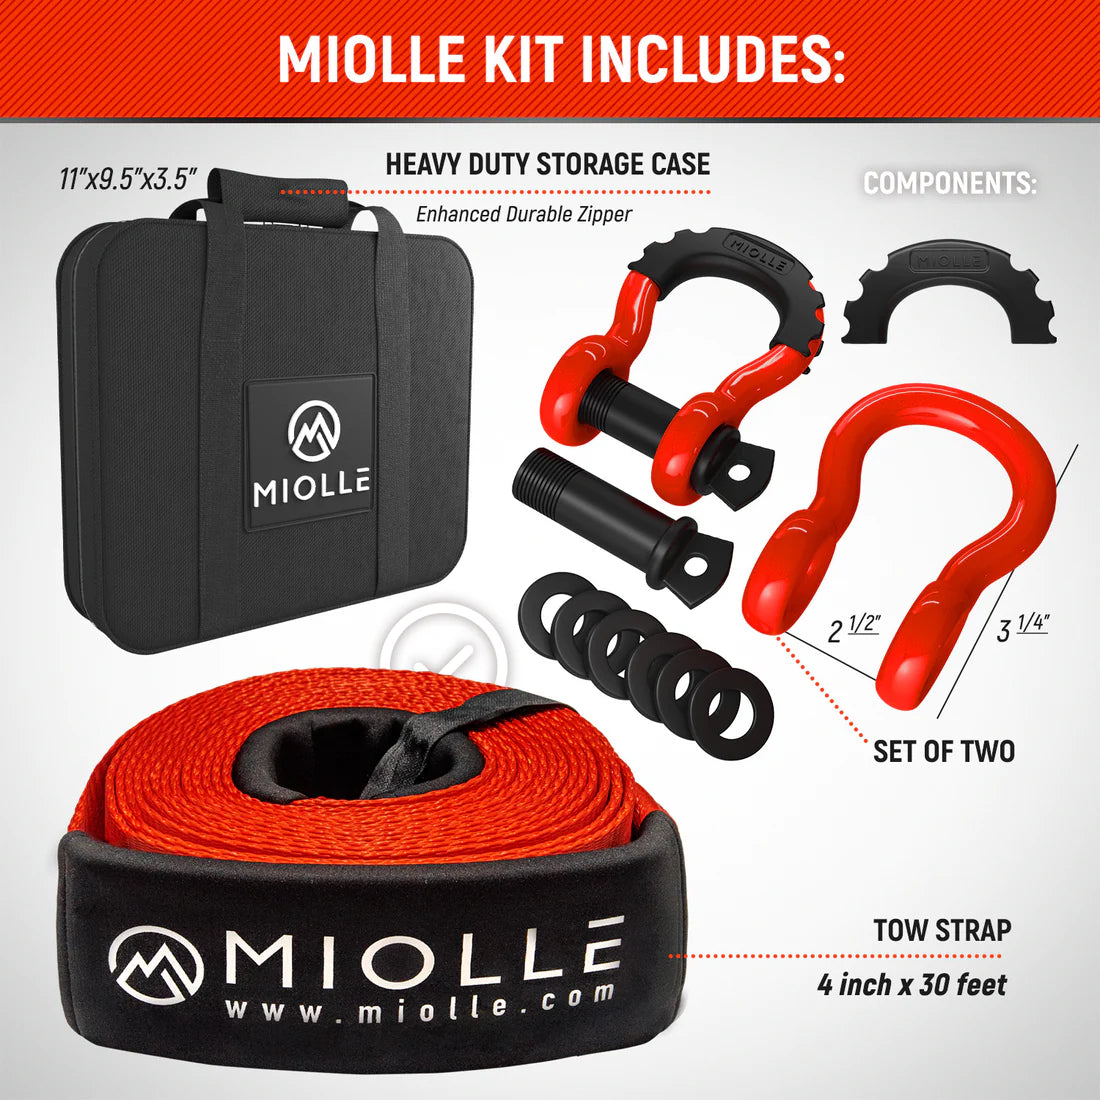 4 x 30 Foot Tow Strap Recovery Kit - by Miolle